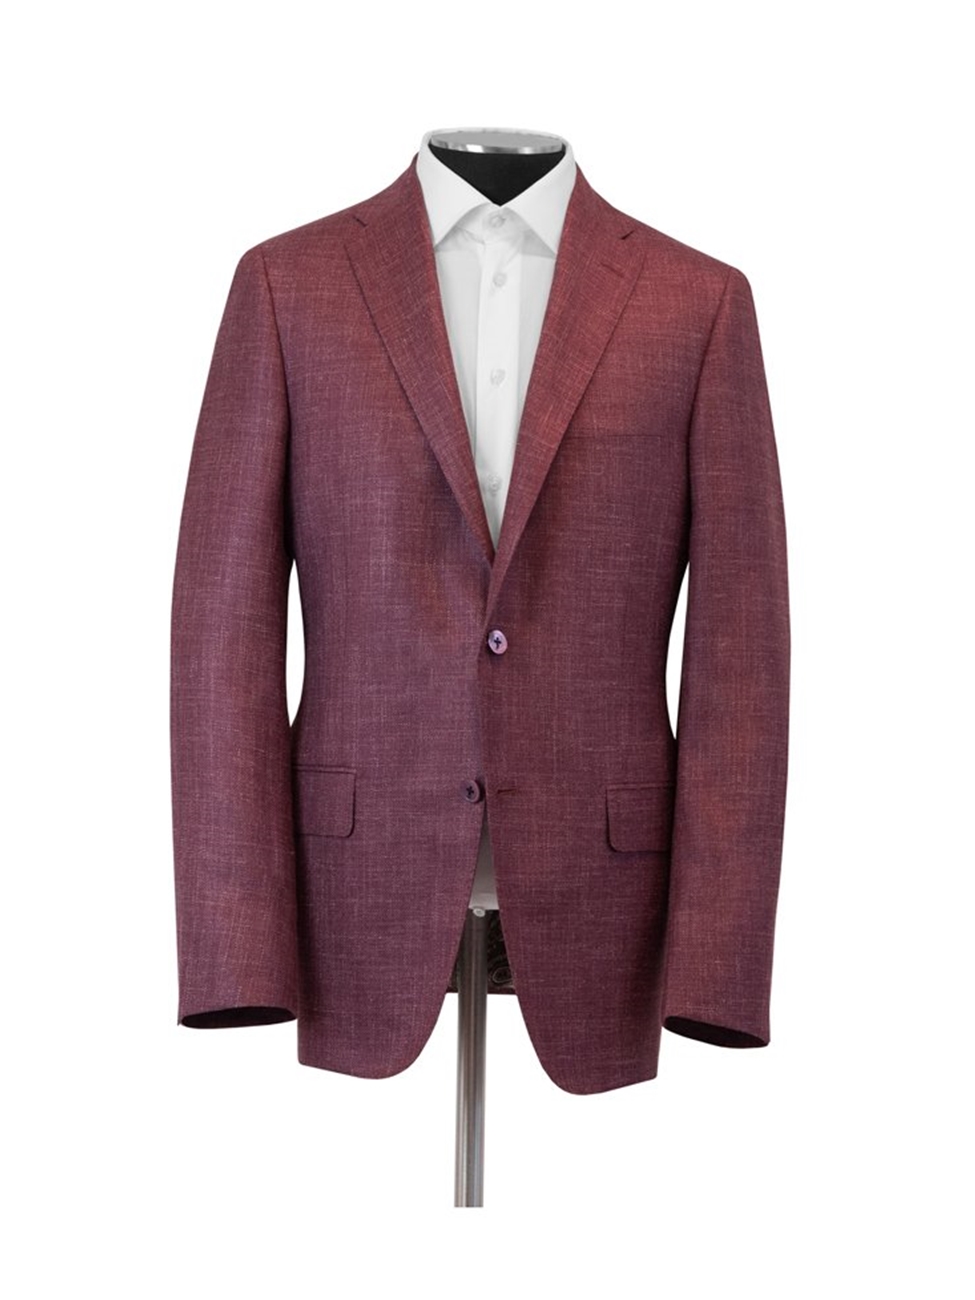 Berry Silk Cashmere Linen Fully Lined Jacket | Hickey Freeman Sport ...